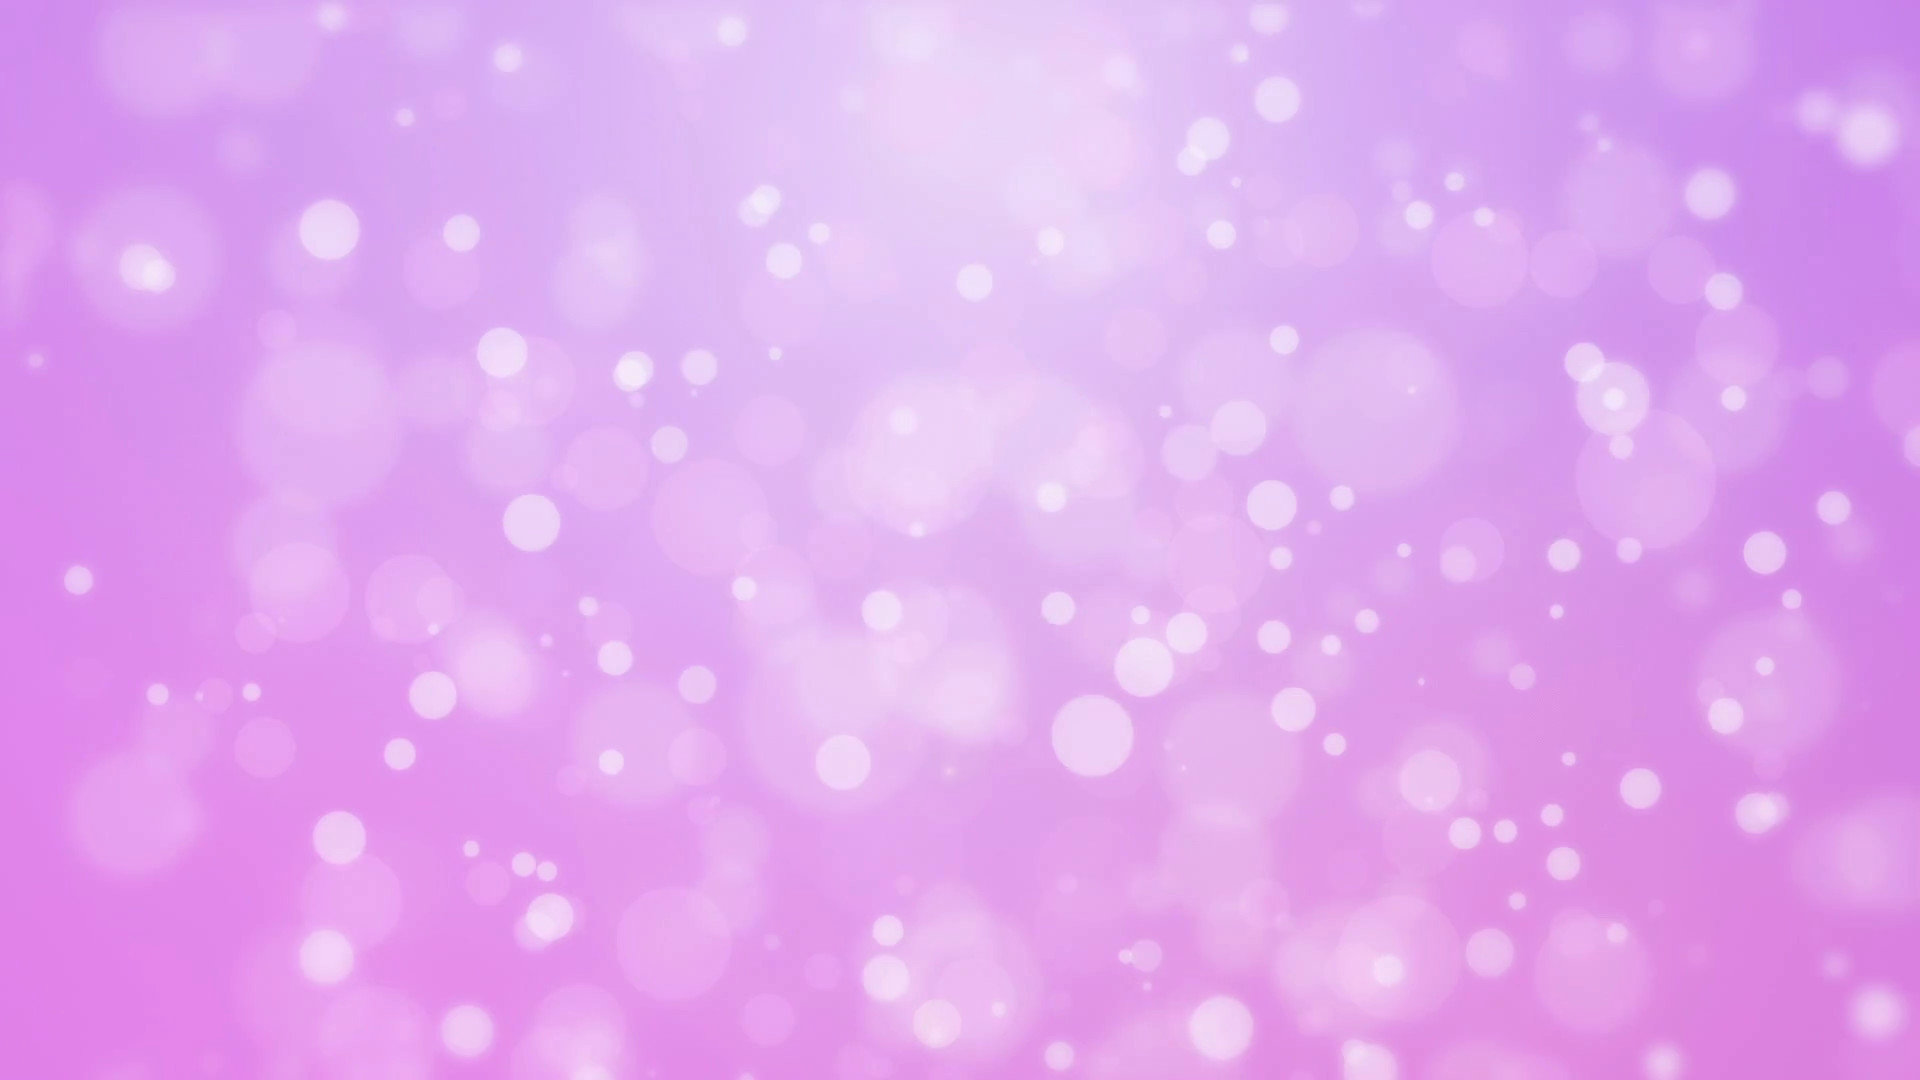 1920x1080 Sweet romantic purple pink gradient animated background with floating  glowing bokeh lights Motion Background - VideoBlocks